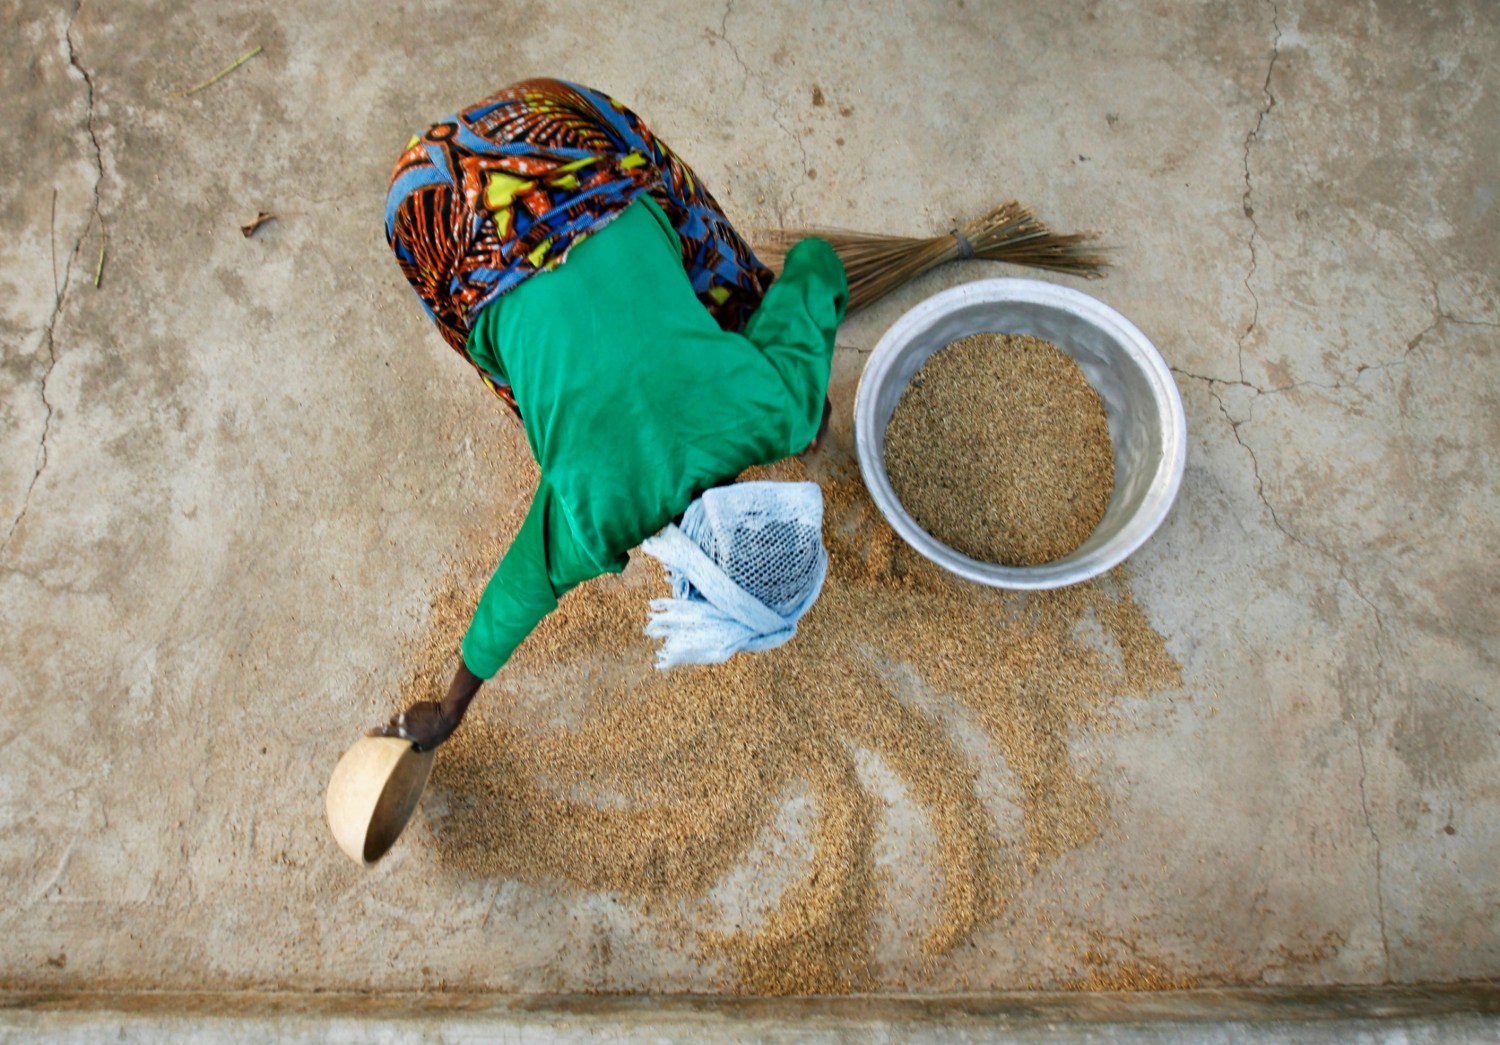 A woman from the Daborin Single Mothers Association gathers rice at a small processing plant in the northern Ghanaian town of Bolgatanga, February 1, 2008. The single mothers began their organisation to gain more freedom and financial independence in a district where most farmers live on the equivalent of about a dollar a day, according to Oxfam, which helps fund the women's programme. REUTERS/Finbarr O'Reilly (GHANA)